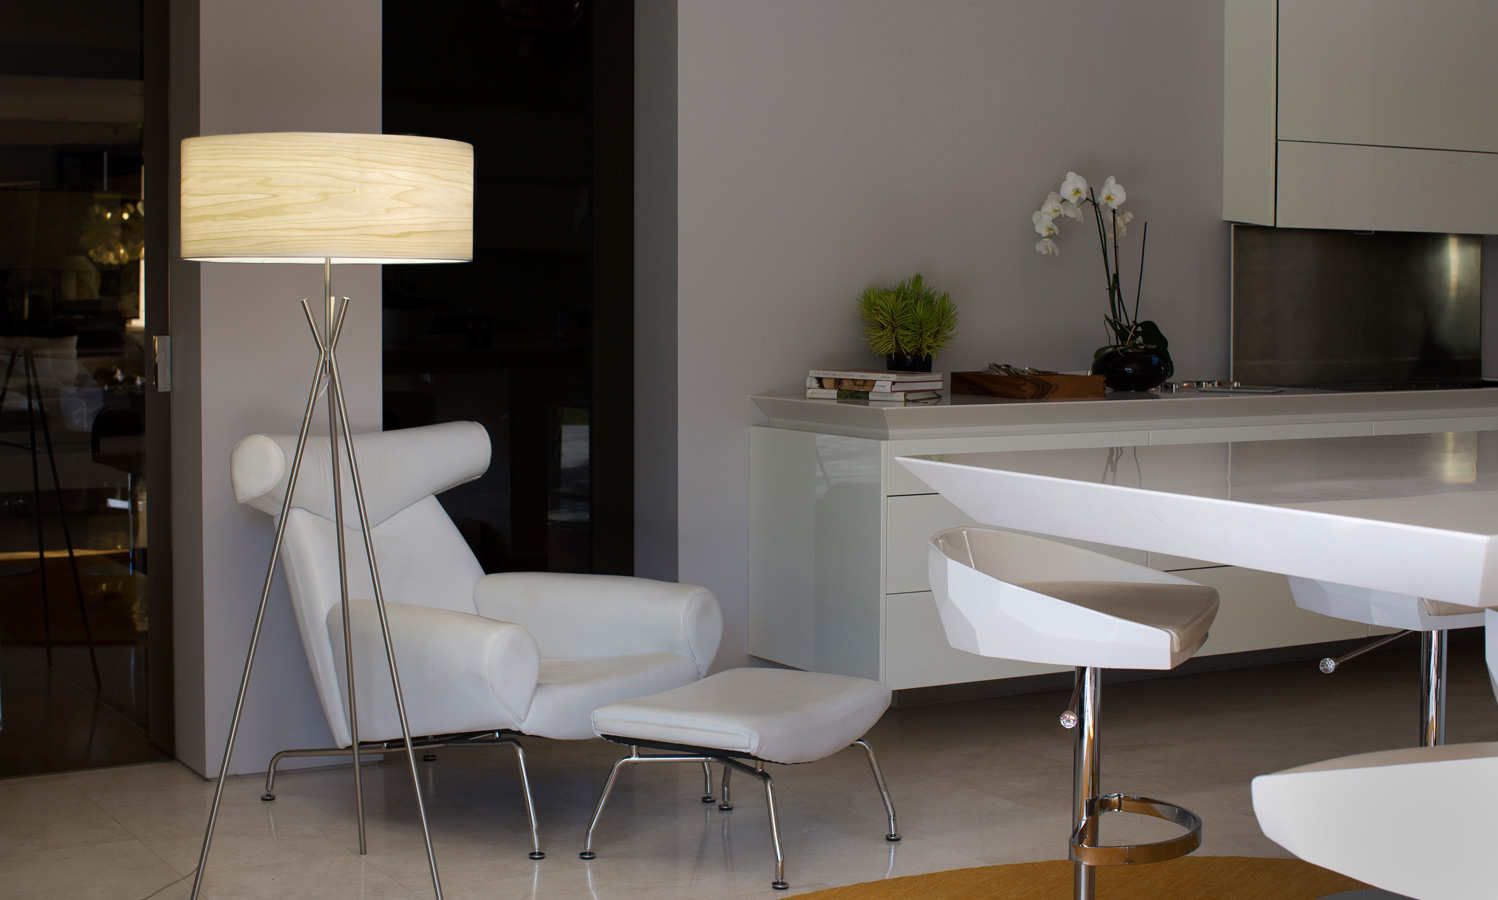 LZF Lamps | Cosmos, Floor Lamp. Marbella, by A-cero Architects | Wood touched by Light | Handmade Wood Lighting since 1994